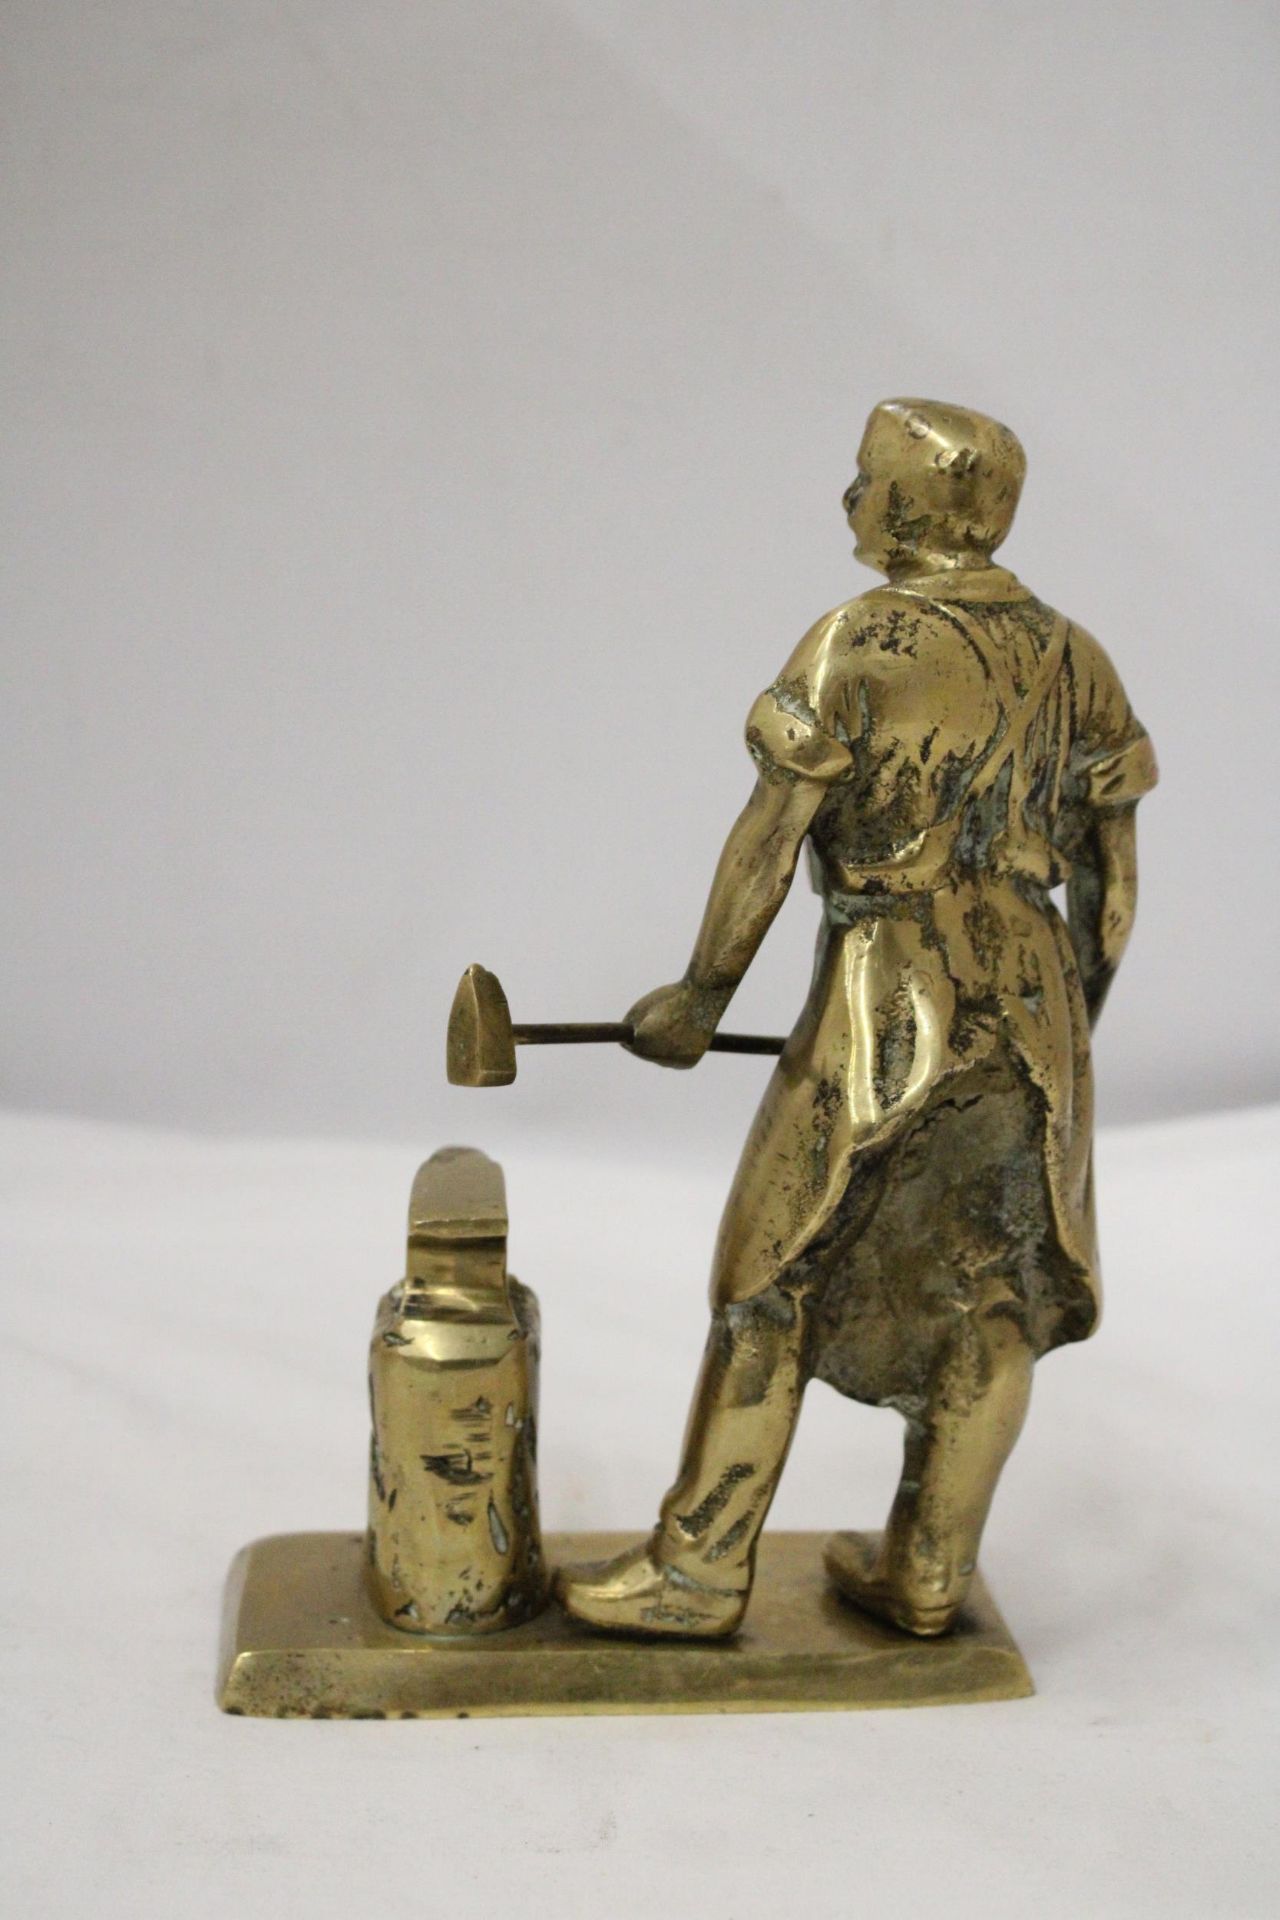 A HEAVY, SOLID, BRASS BLACKSMITH FIGURE, WEIGHS 4 KILOS, HEIGHT 20CM - Image 4 of 5